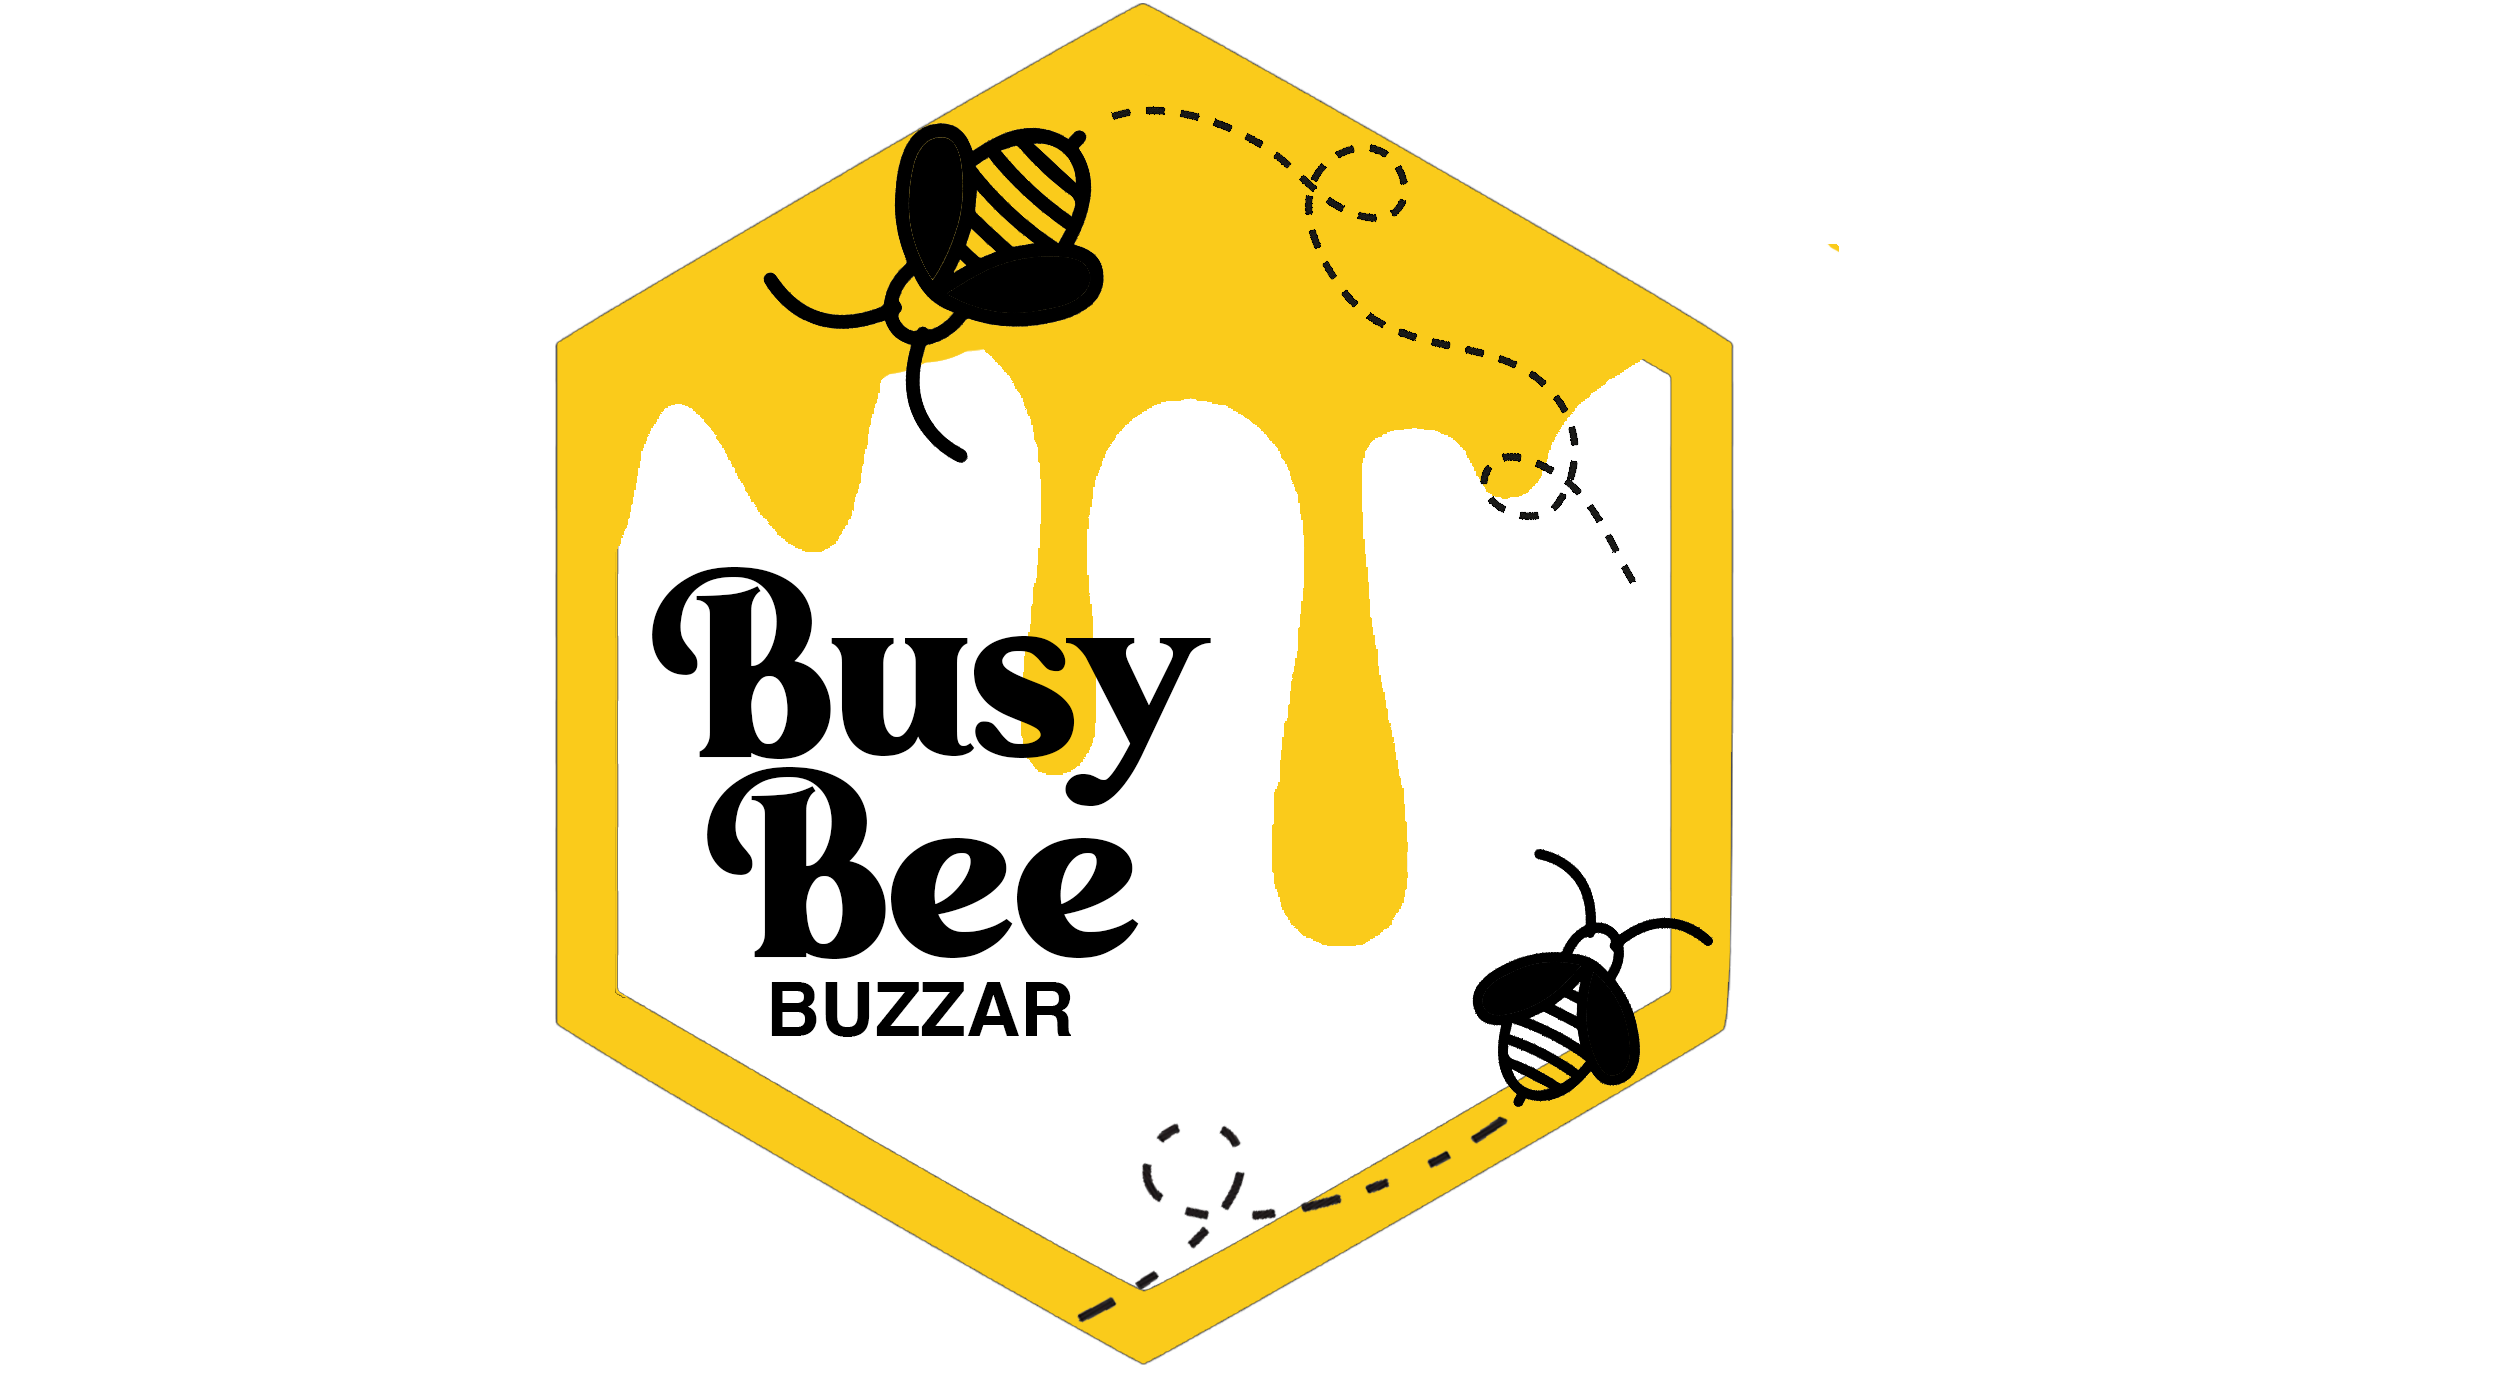 Be hive with two bees flying around with honey dripping down the hive which reads busy bee buzzar